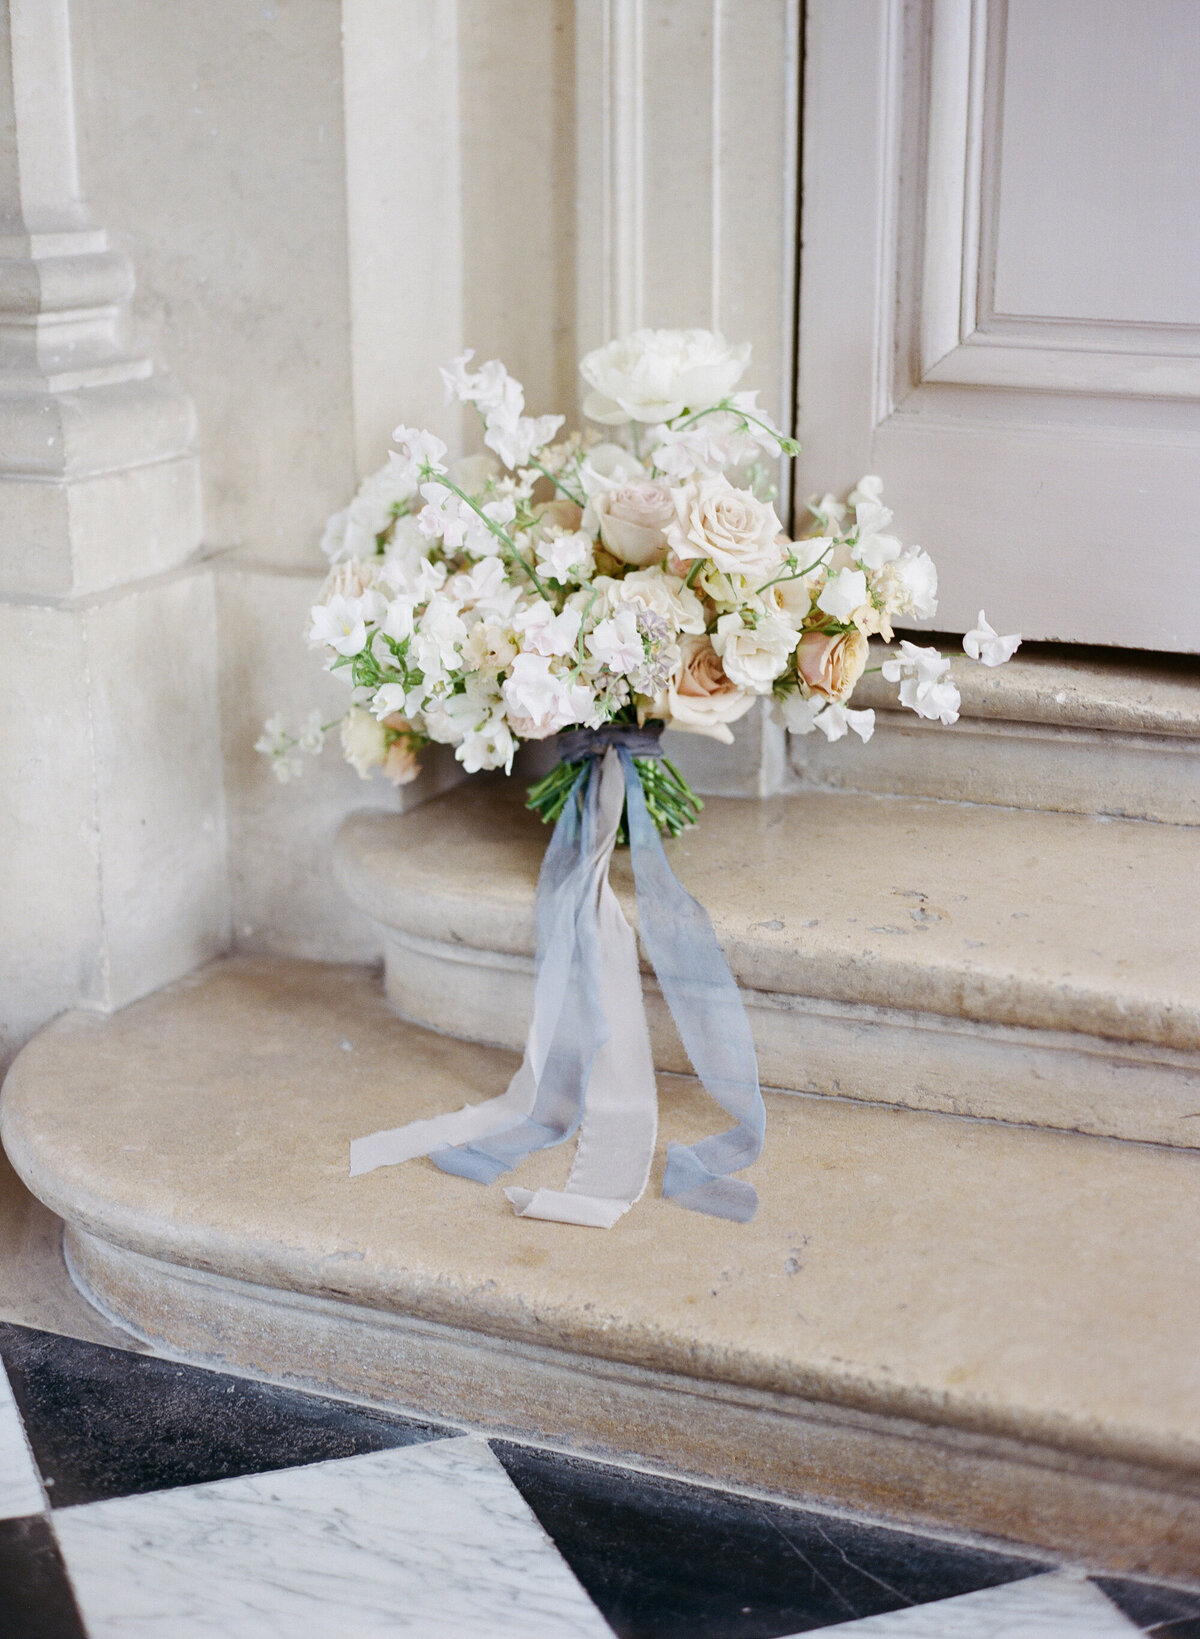 Jennifer Fox Weddings English speaking wedding planning & design agency in France crafting refined and bespoke weddings and celebrations Provence, Paris and destination Laurel-Chris-Chateau-de-Champlatreaux-Molly-Carr-Photography-30